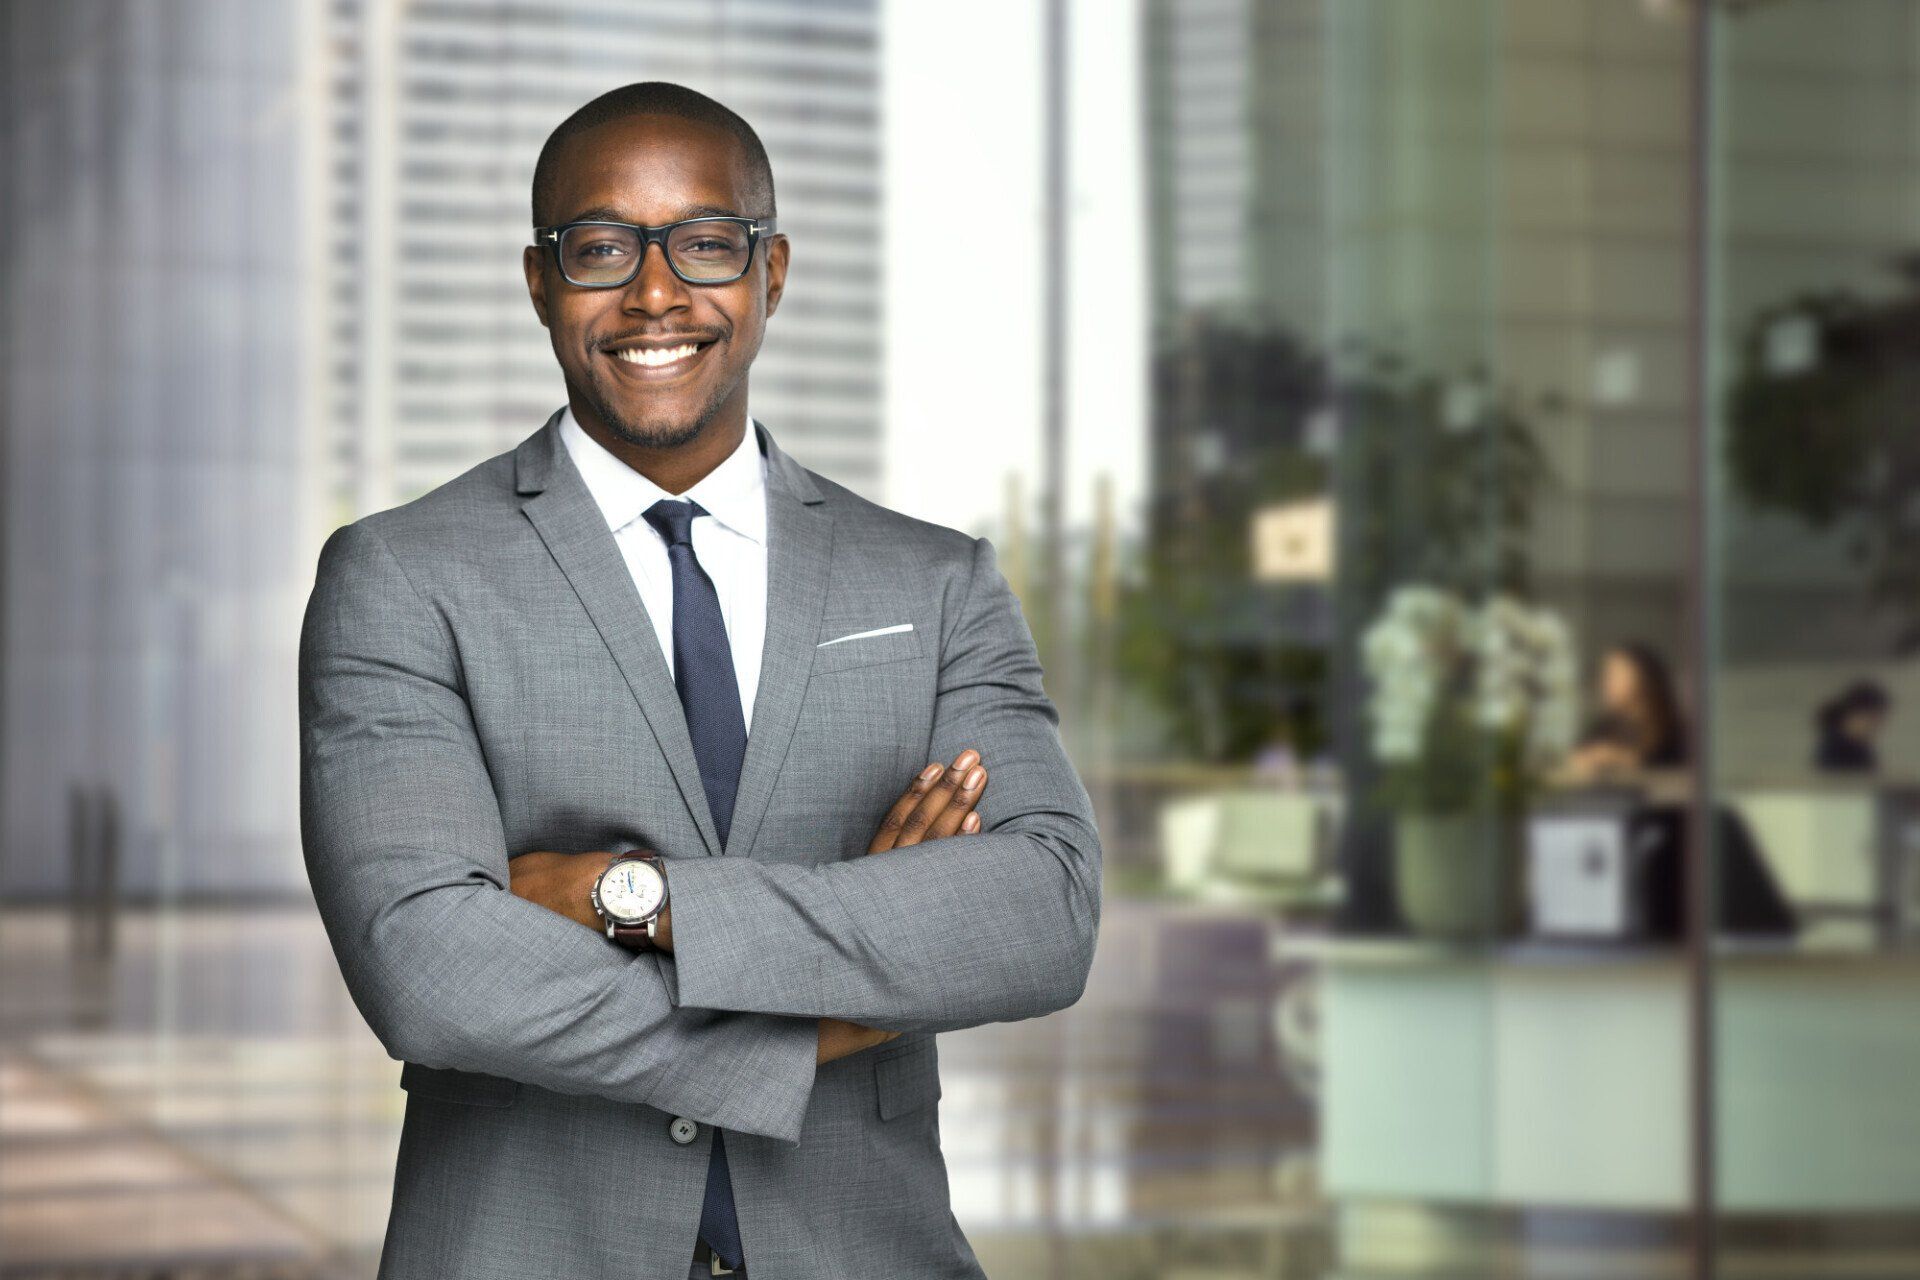 Black-owned businesses are receiving more investment funding